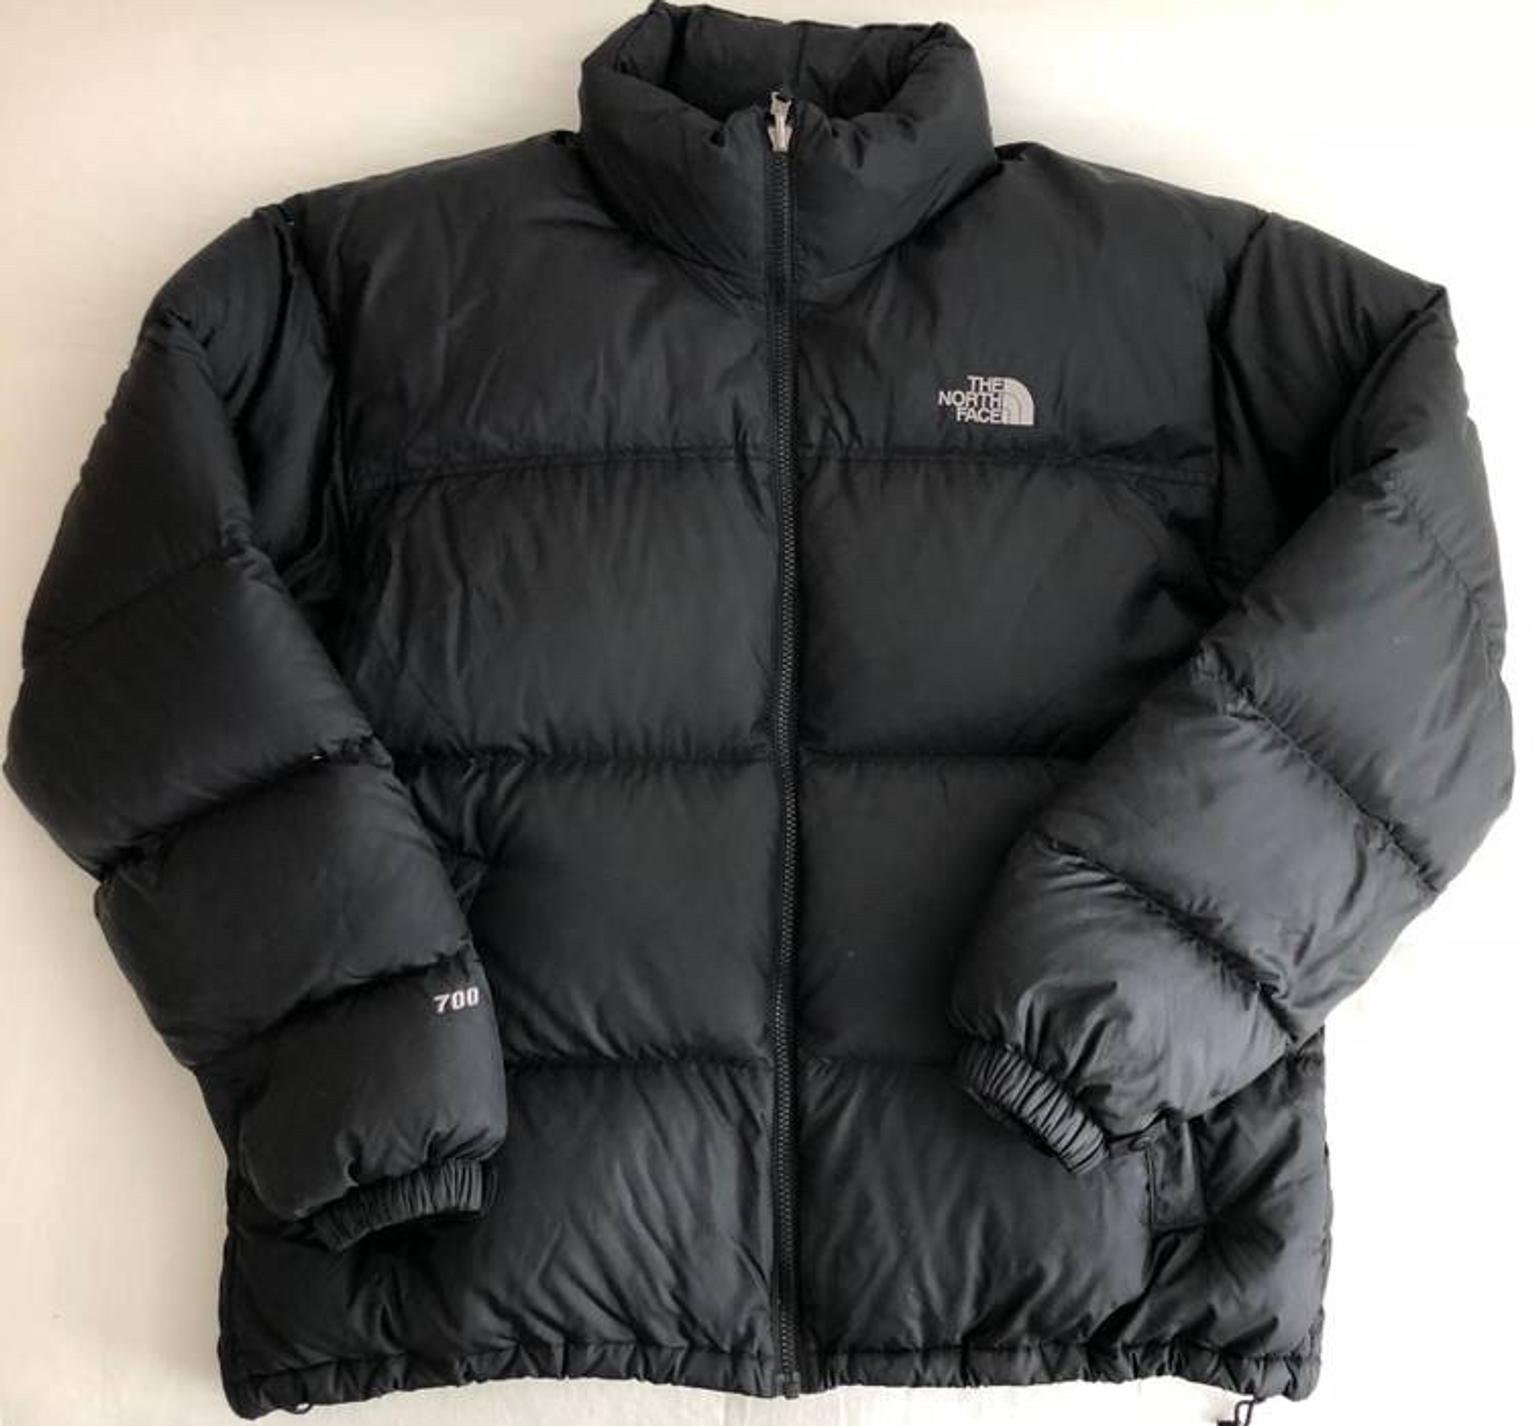 north face coat 700 Online Shopping for 